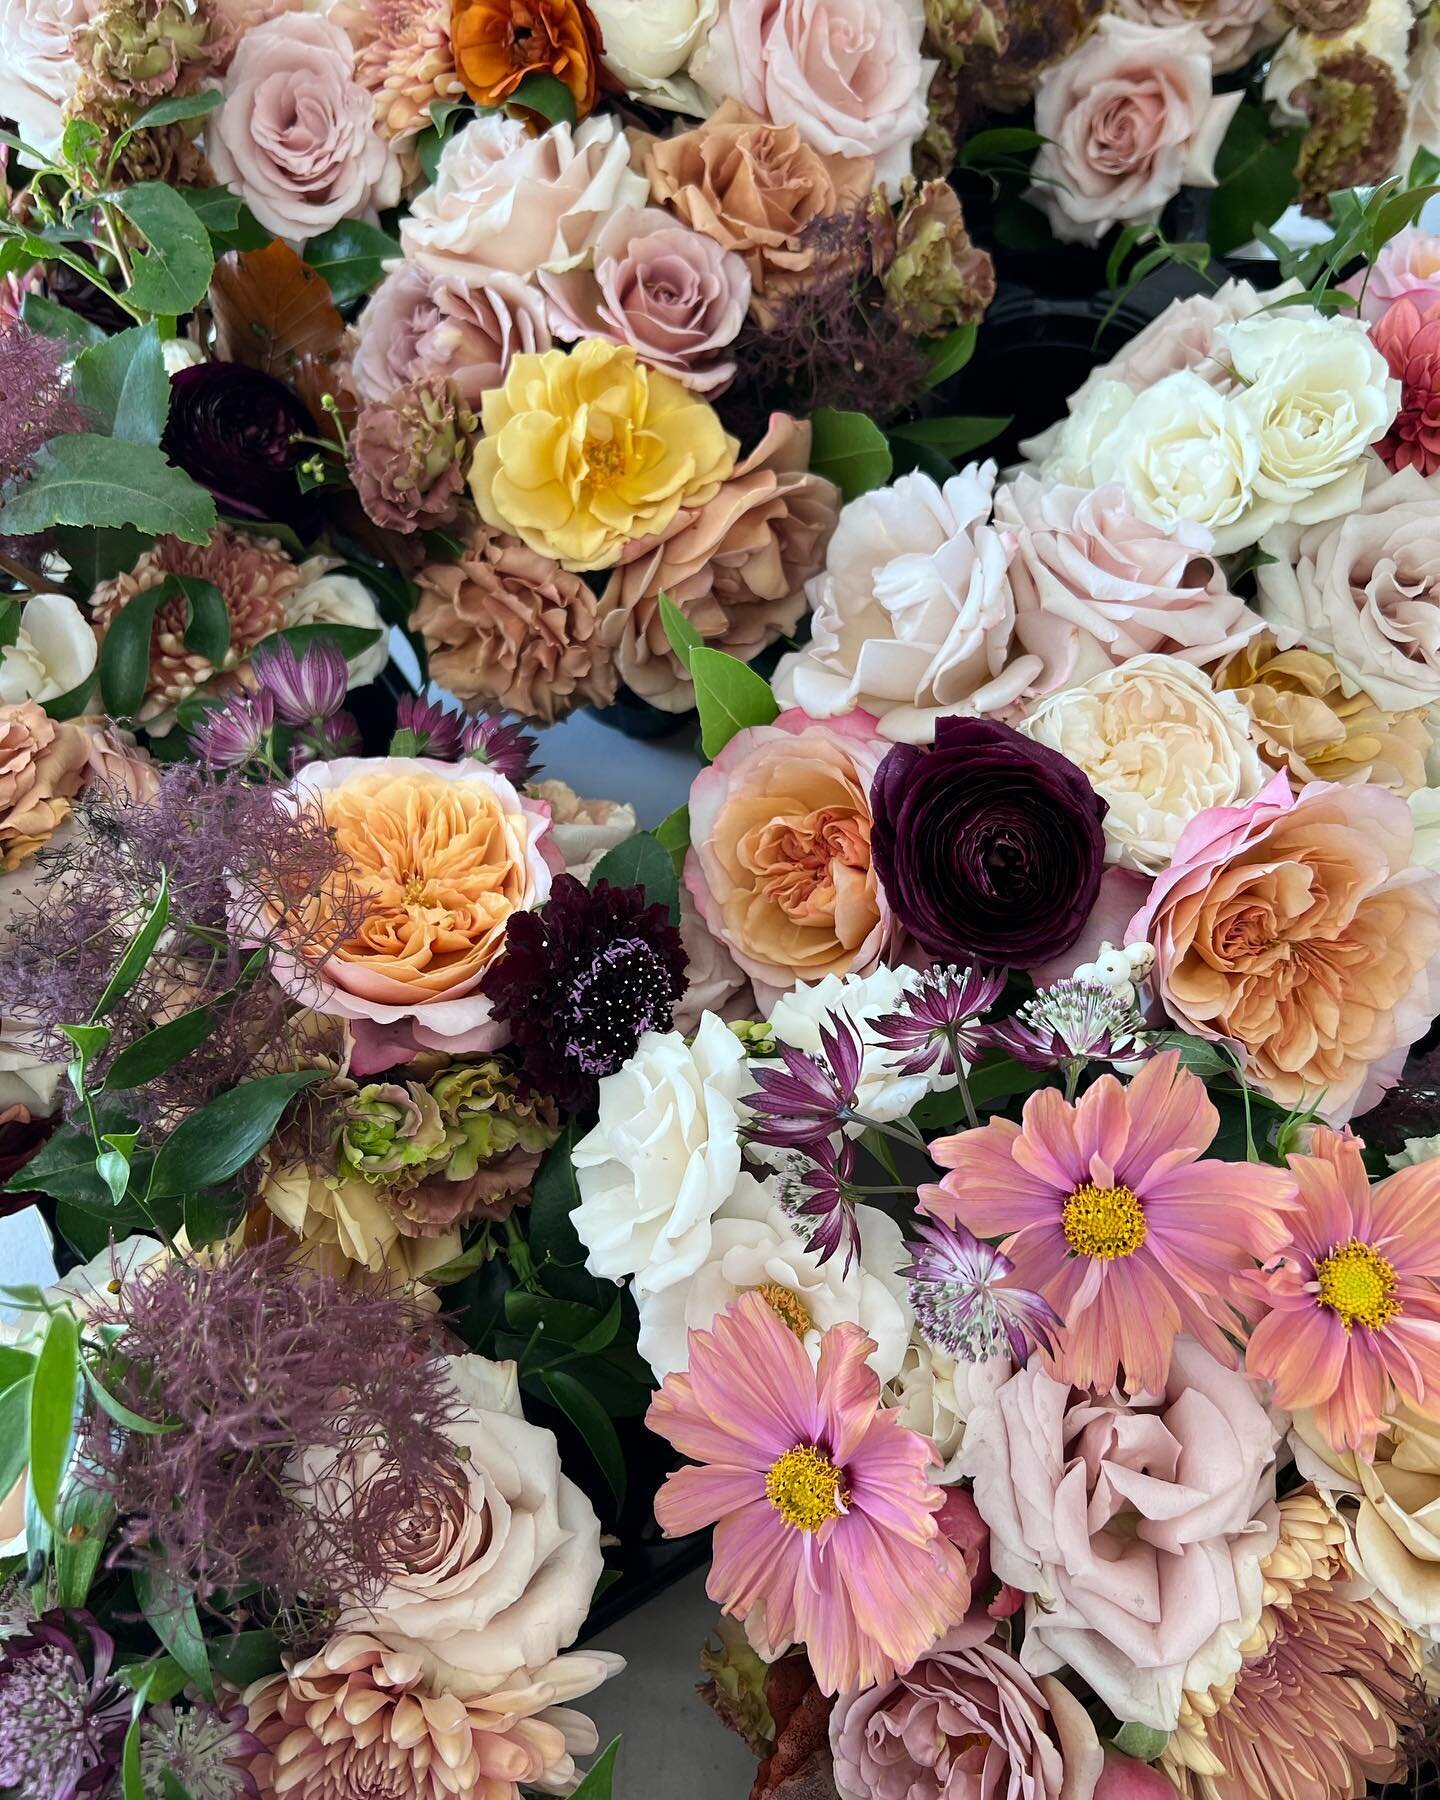 We created over 50 beautiful arrangements of repurposed flowers from one of our two donated weddings this weekend! 

We know the volunteer delivery drivers for @mealsthatconnect in Los Osos are going to have a great morning making these special deliv